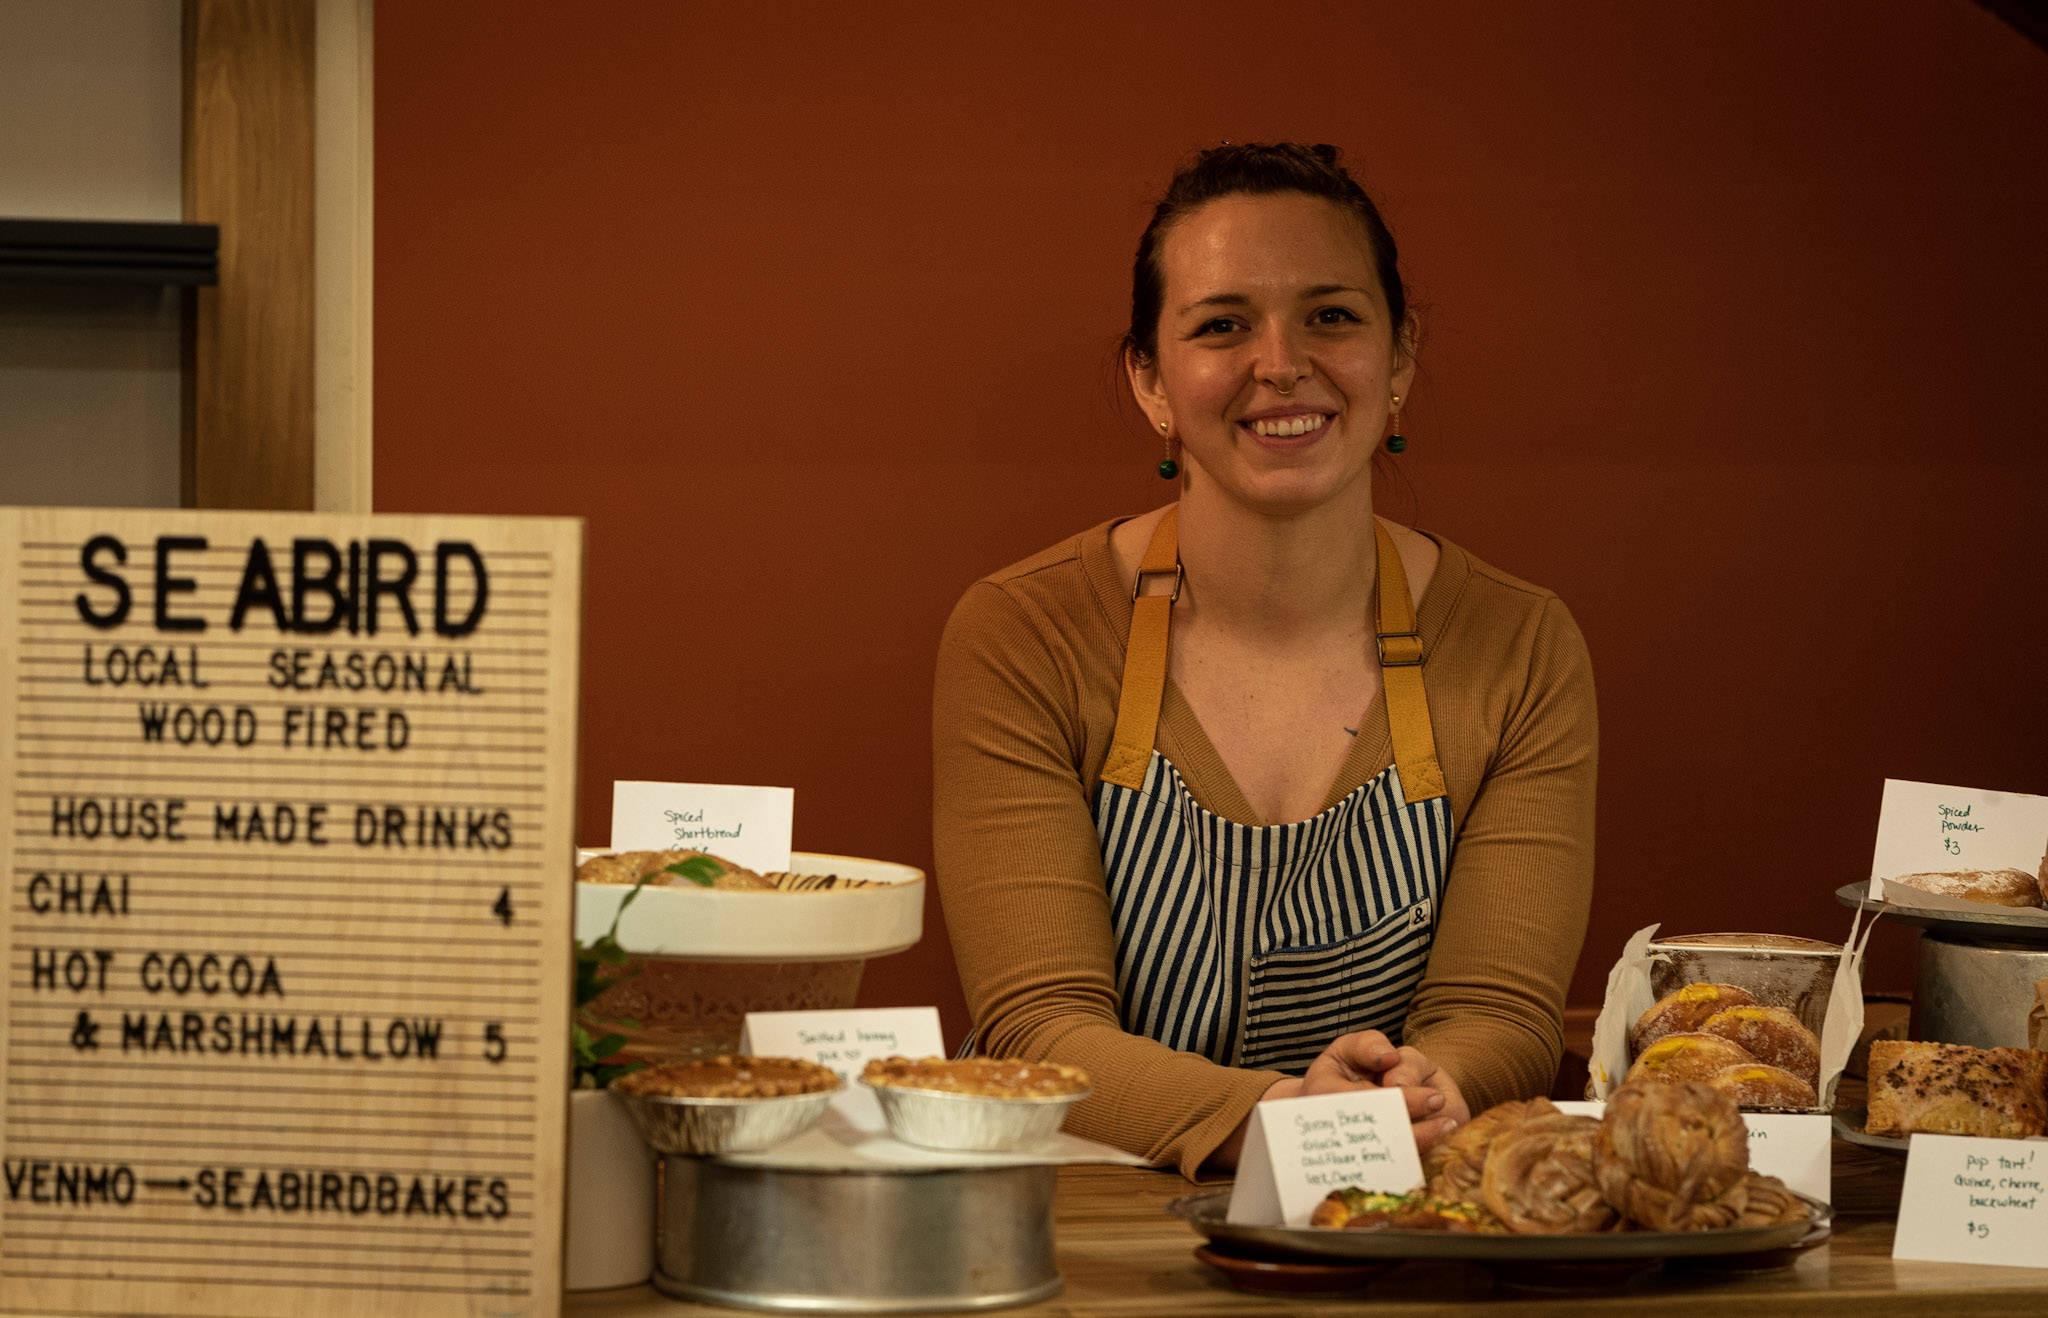 Andy Agulue photo
Brea Currey, creator and owner of Seabird Bakeshop, sells her locally sourced, seasonally inspired treats on Tuesdays.